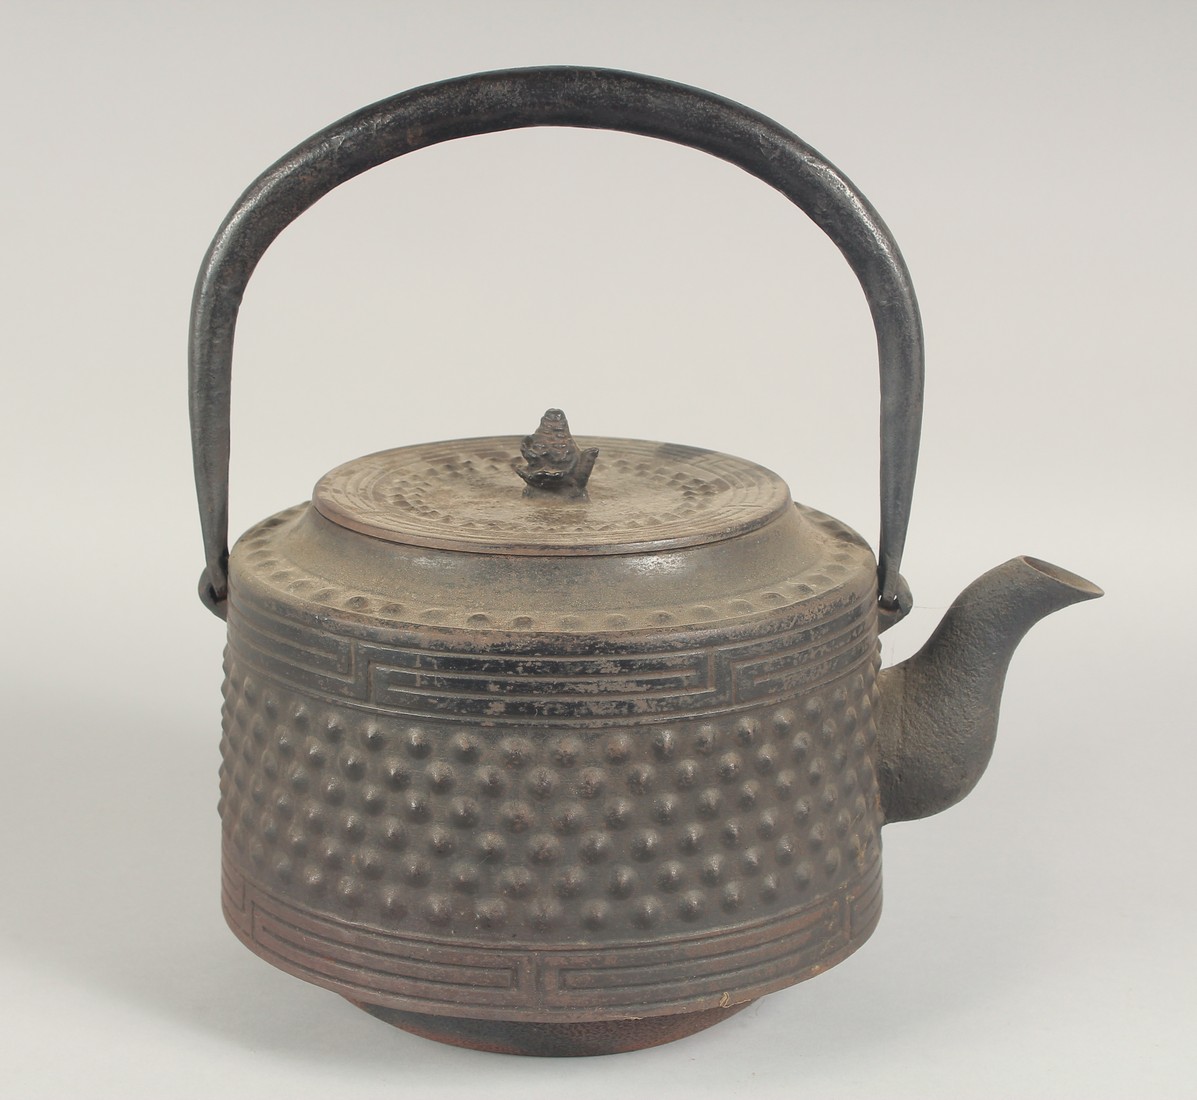 A LARGE 19TH CENTURY JAPANESE CAST IRON TETSUBIN / KETTLE, designed with bands of raised bosses, - Image 3 of 6